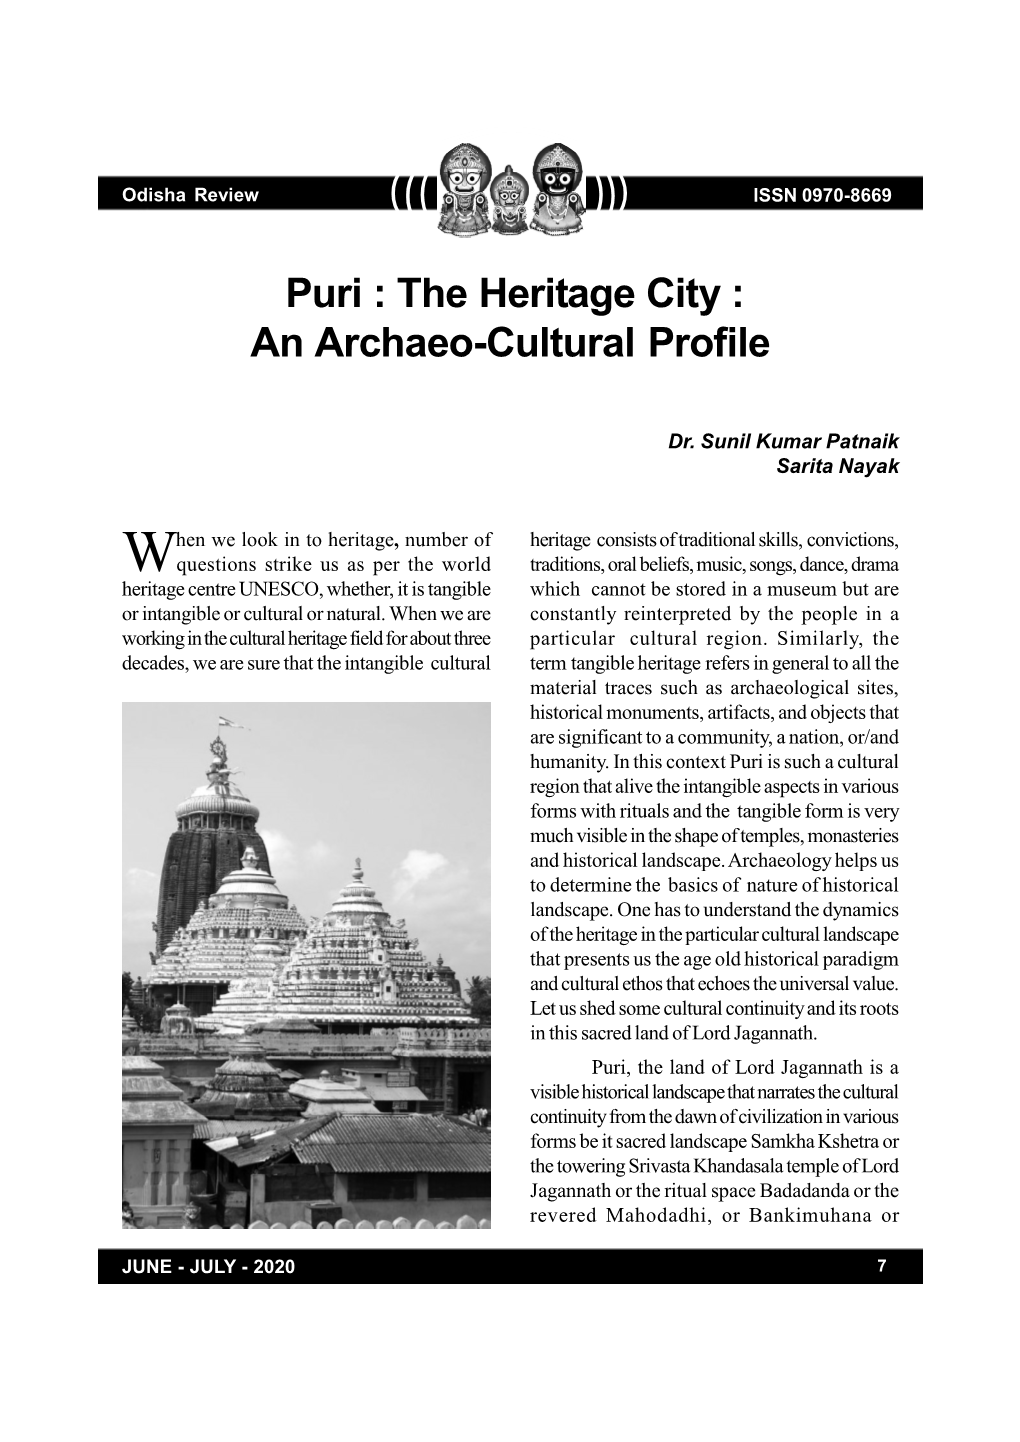 Puri : the Heritage City : an Archaeo-Cultural Profile